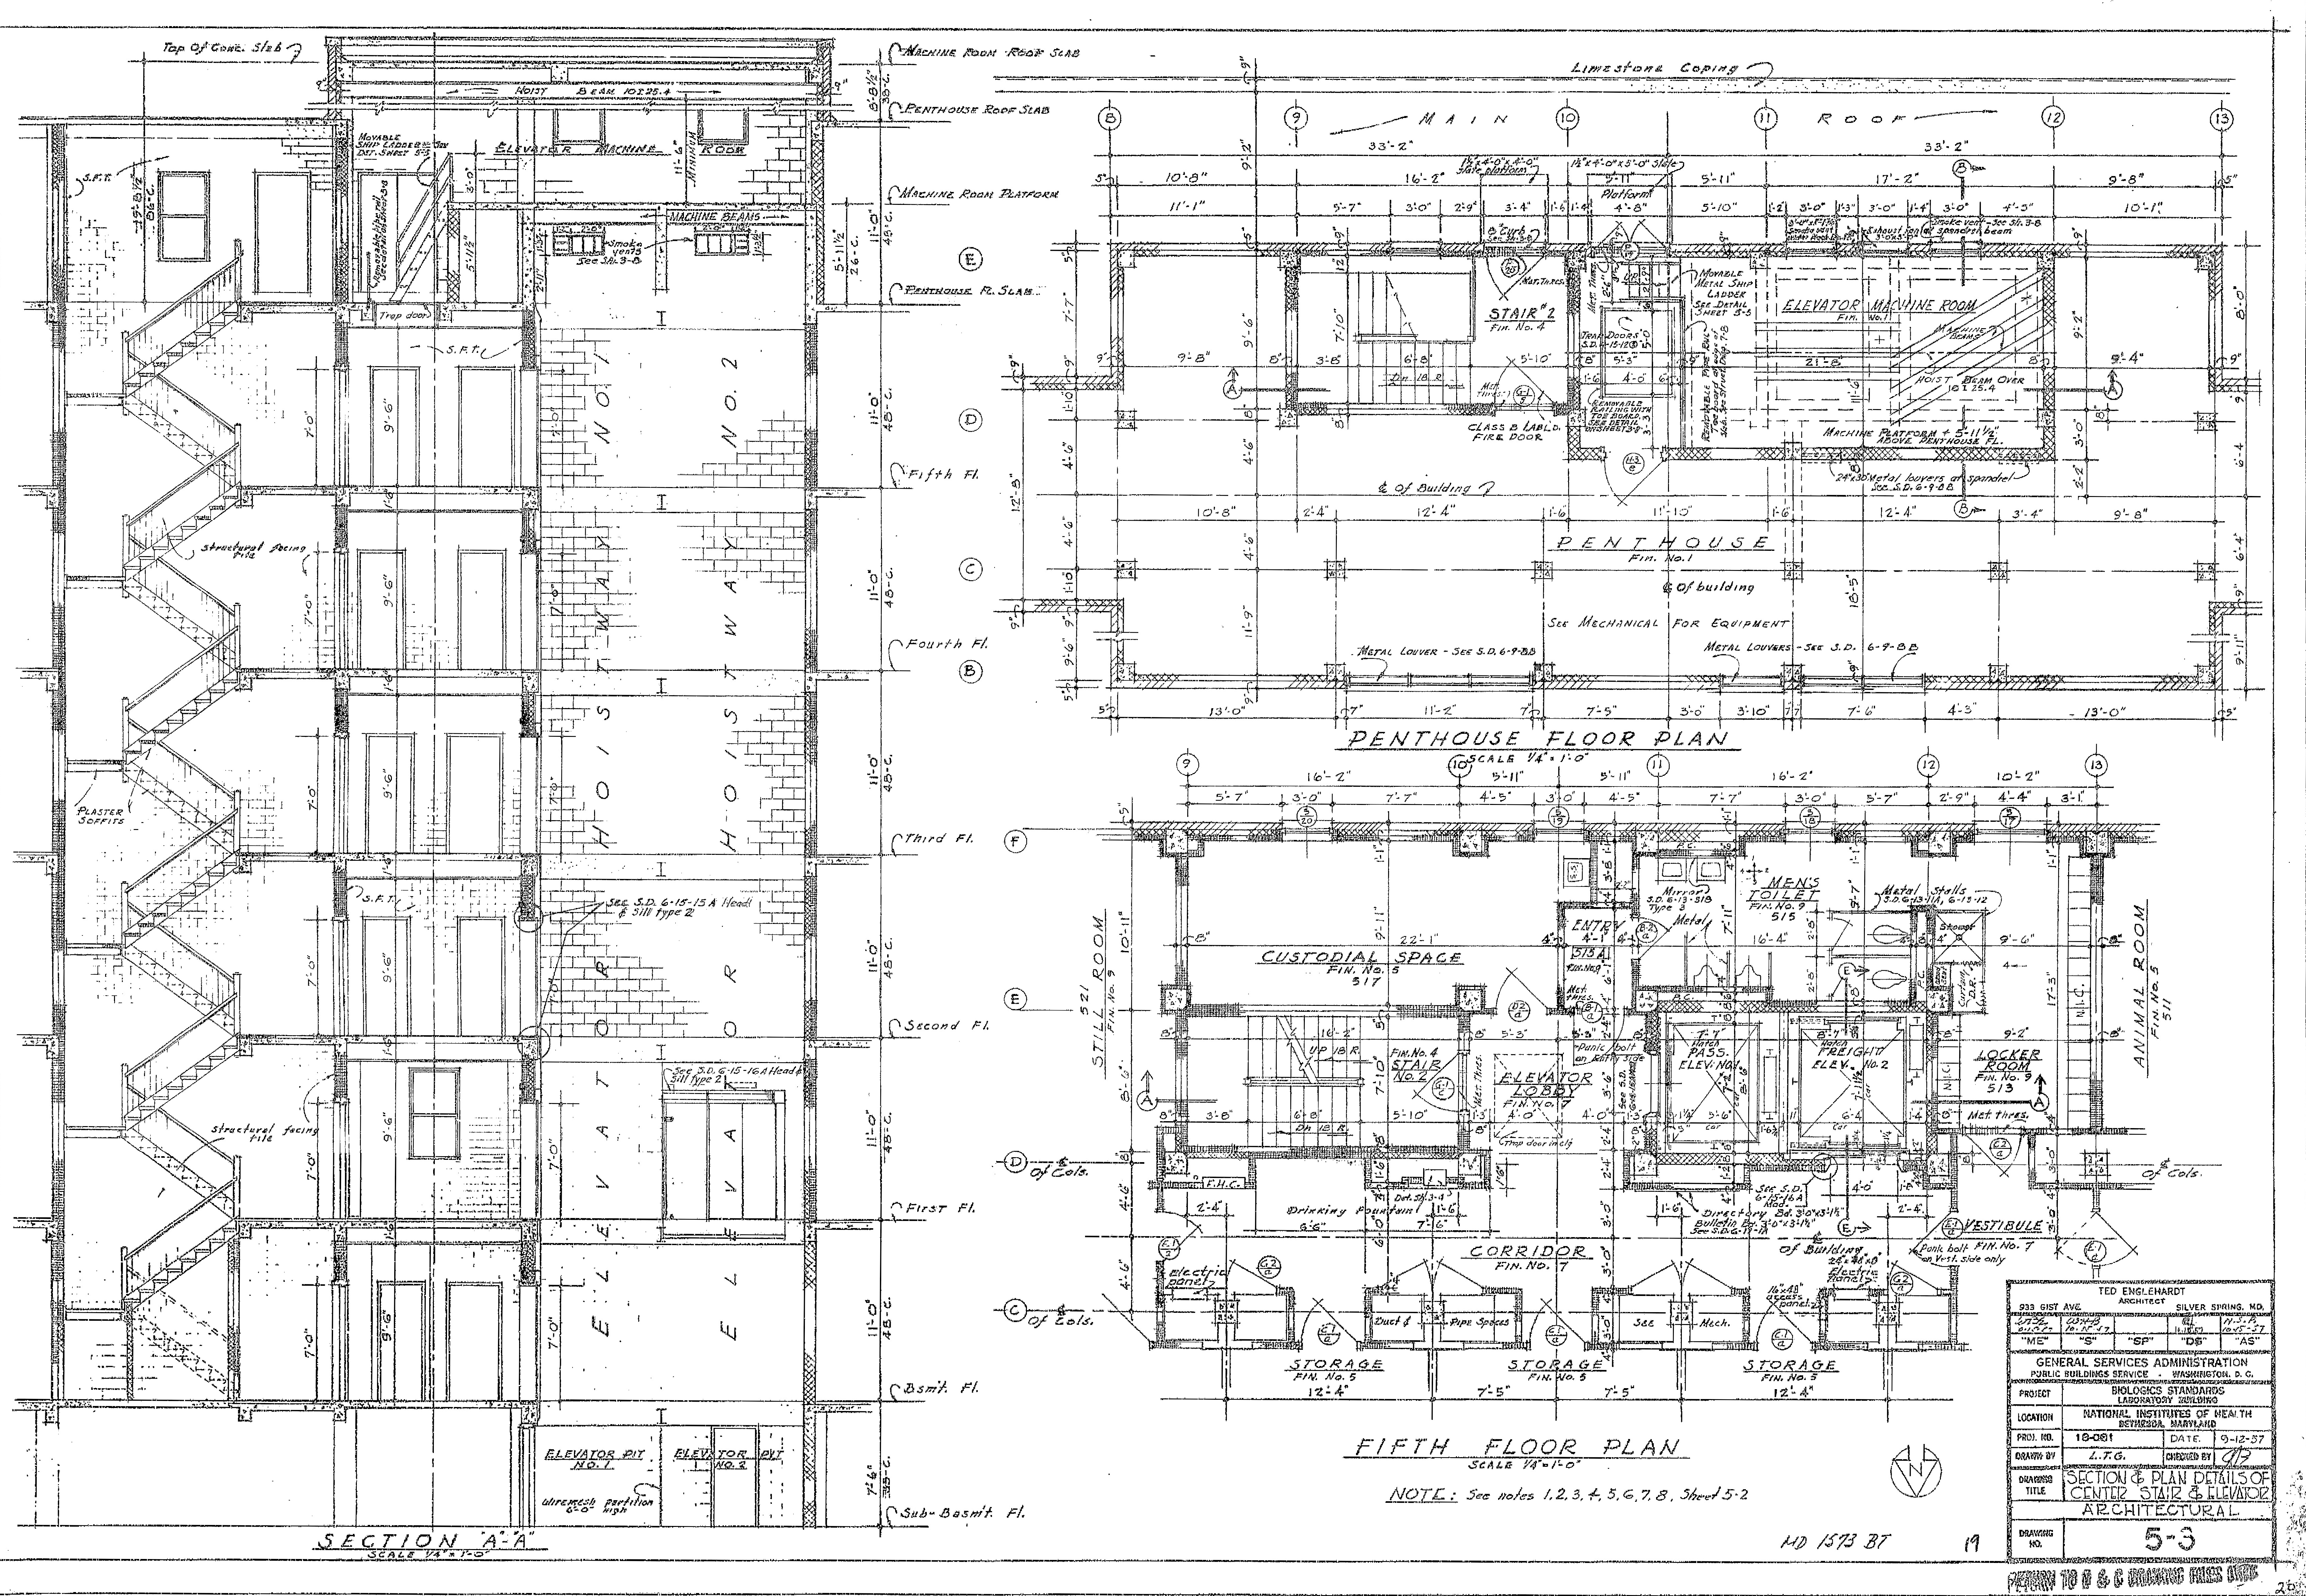 Architectural section drawing and plan details of center stairwell and elevator of Building 29